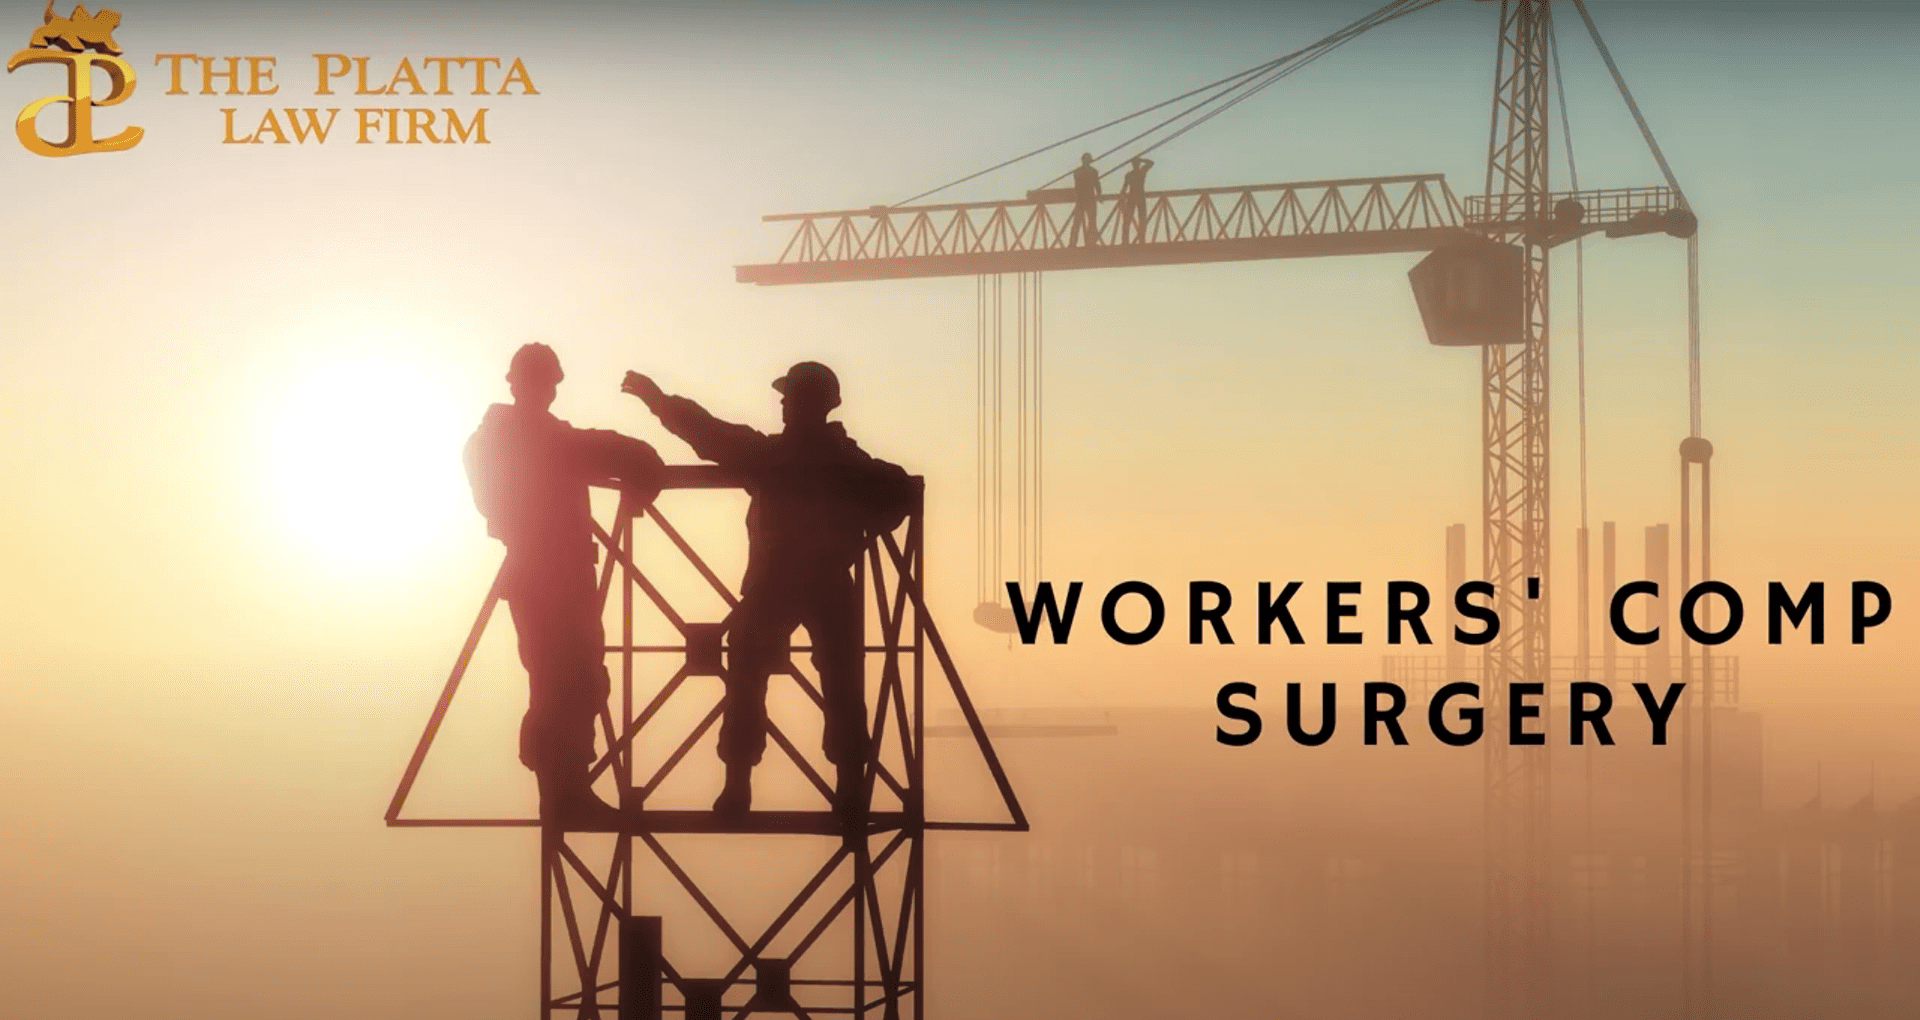 WORKERS COMP SURGERY Post